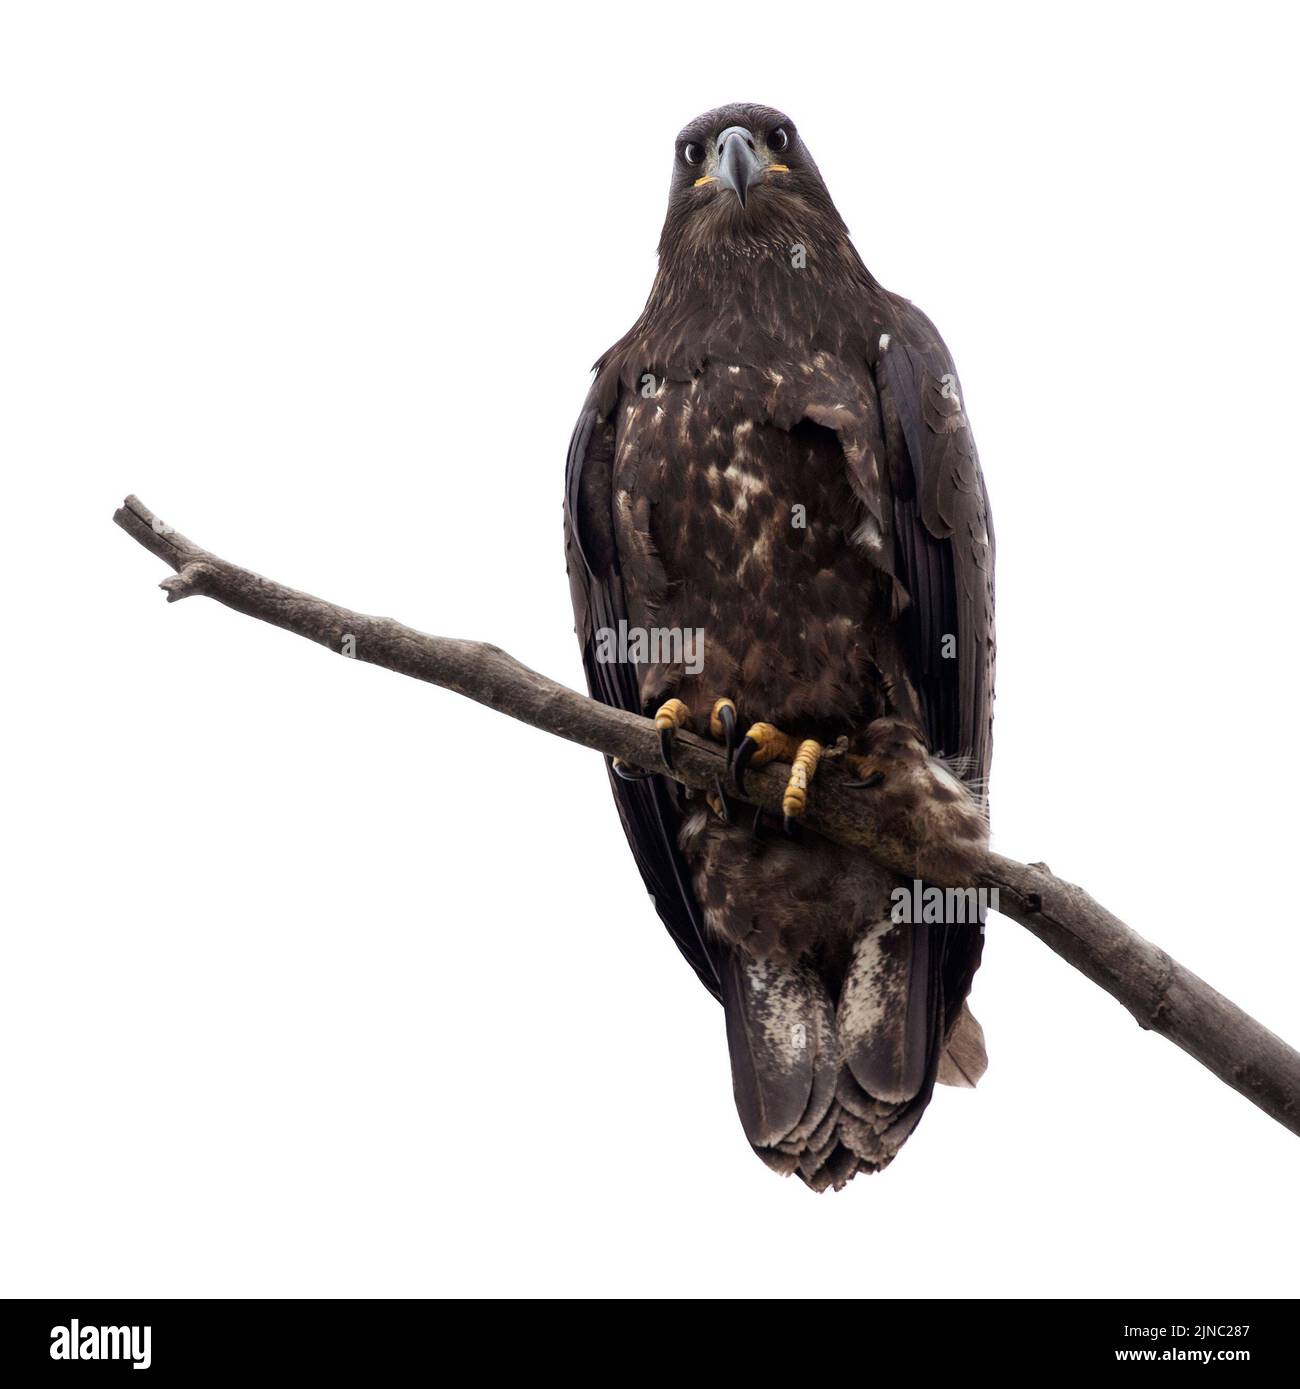 Young Bald Eagle fledgling perched on a tree branch in Calgary, Alberta, Canada. The bird is a few months old. Haliaeetus leucocephalus. Stock Photo